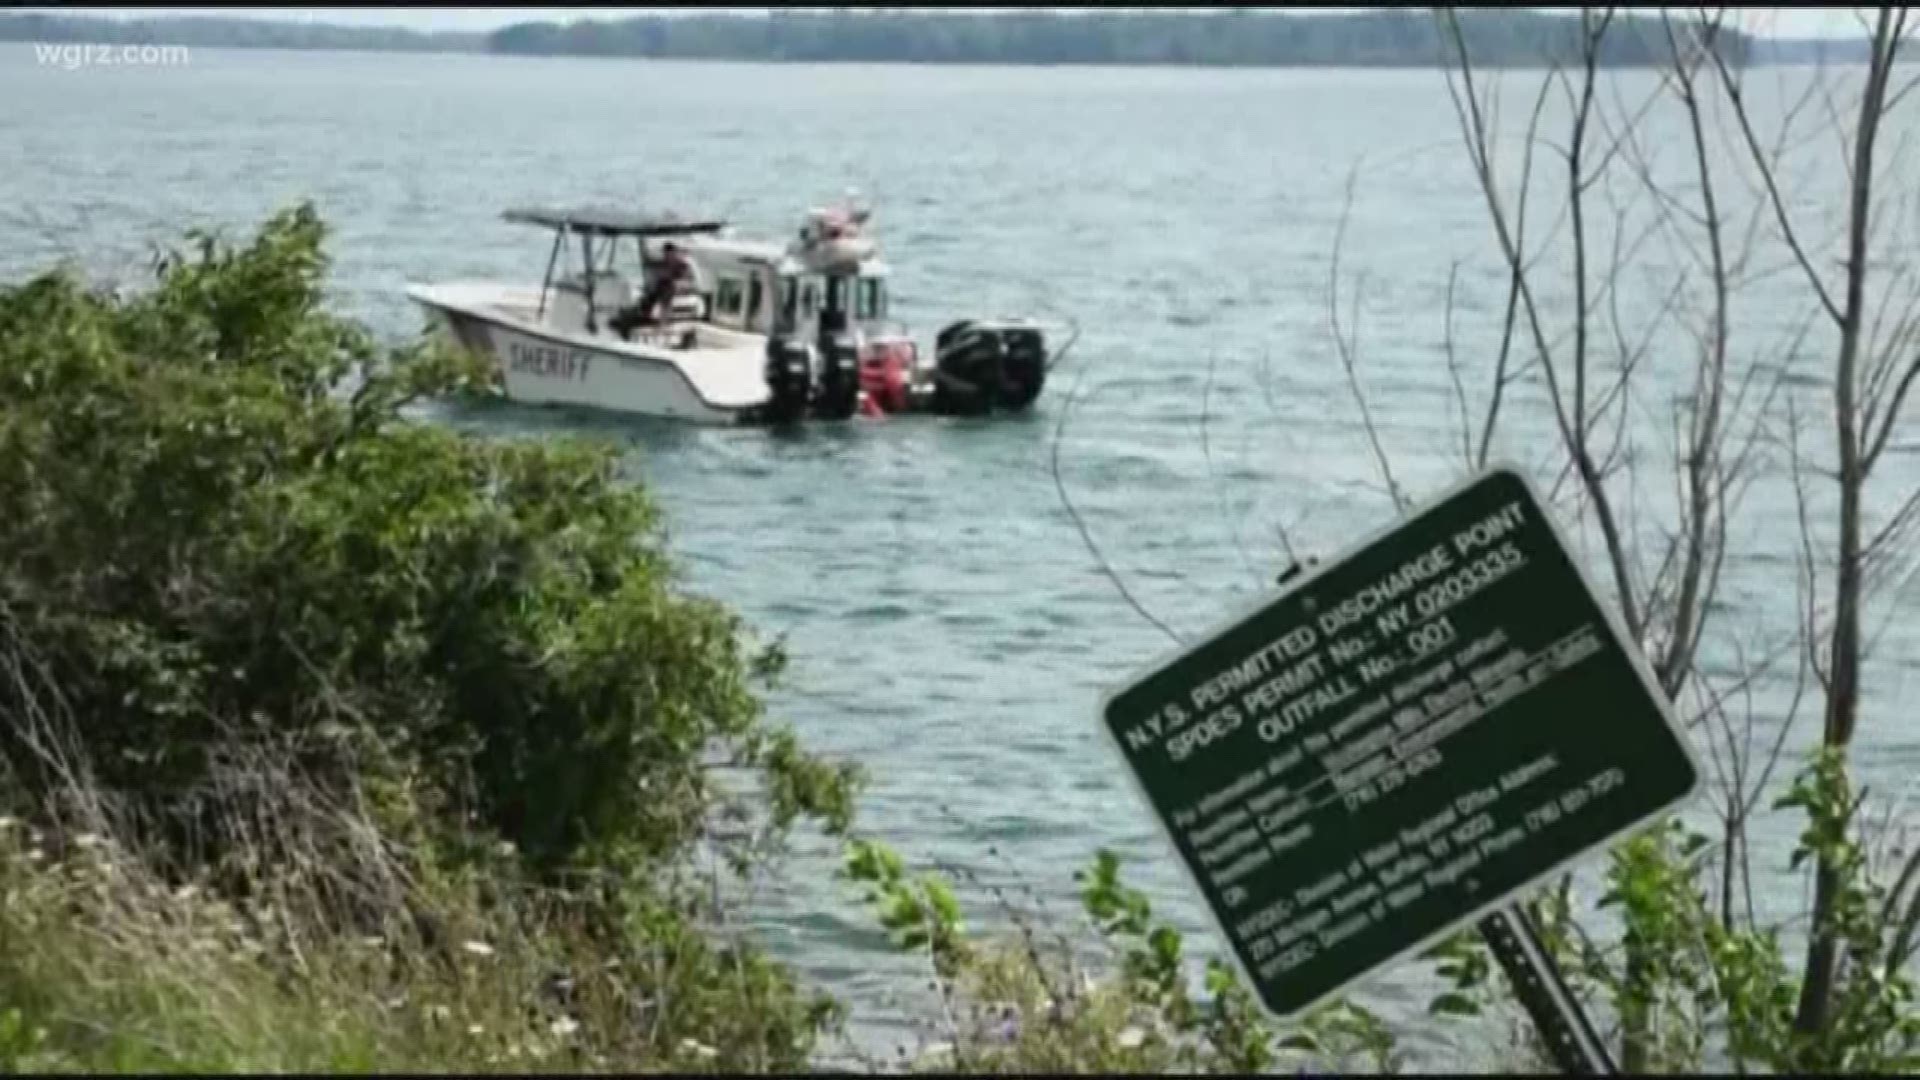 Body of adult male found in Niagara River